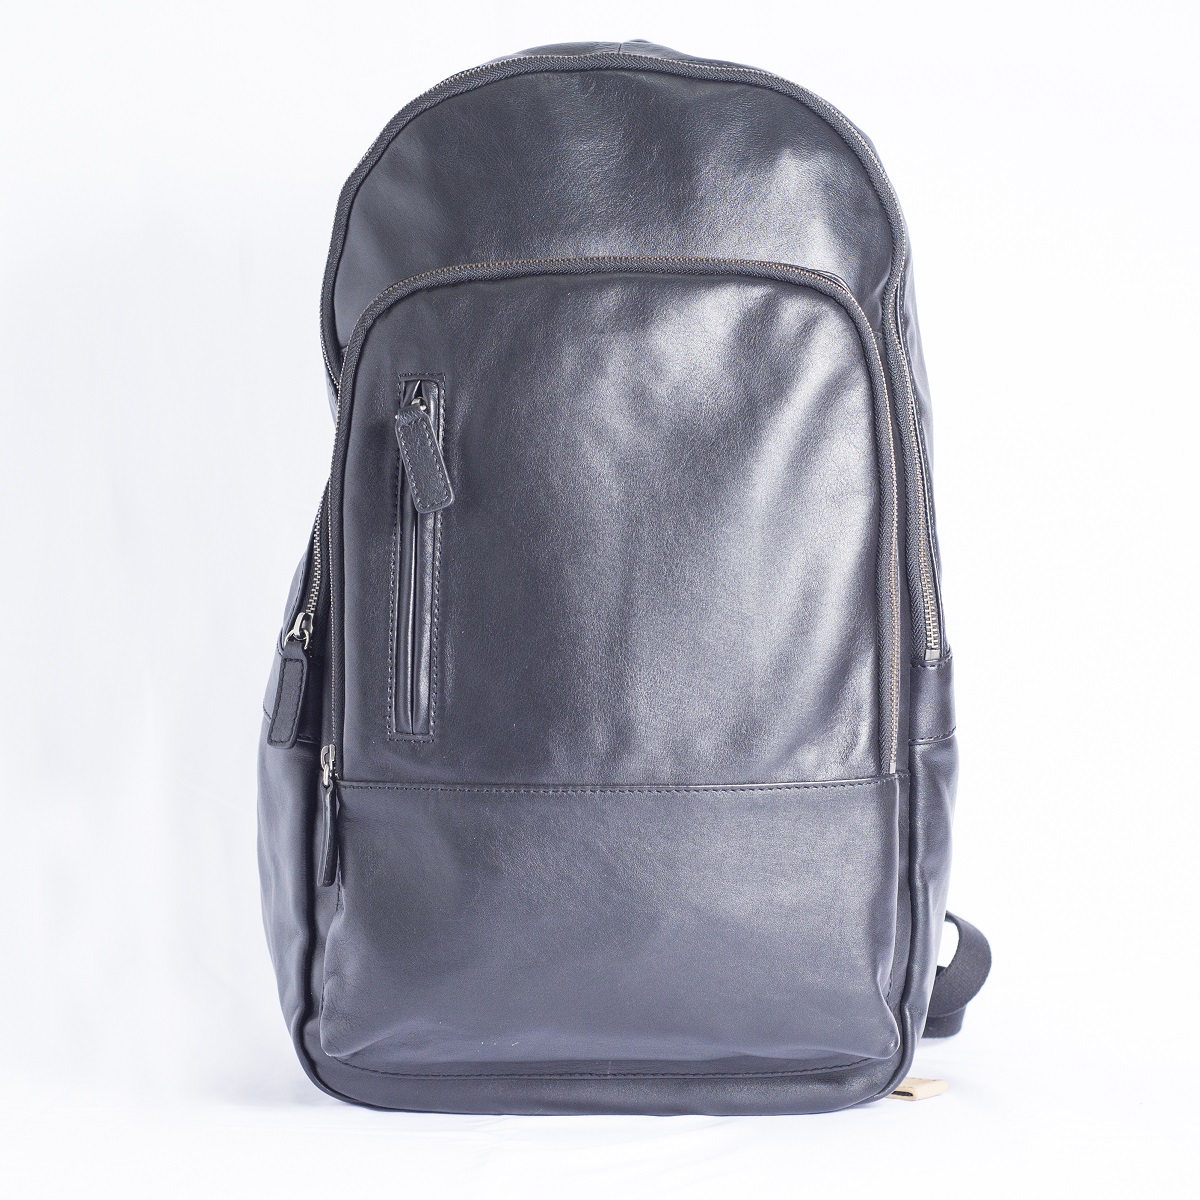 Cow Oily Nappa Leather Men's Backpack Bags